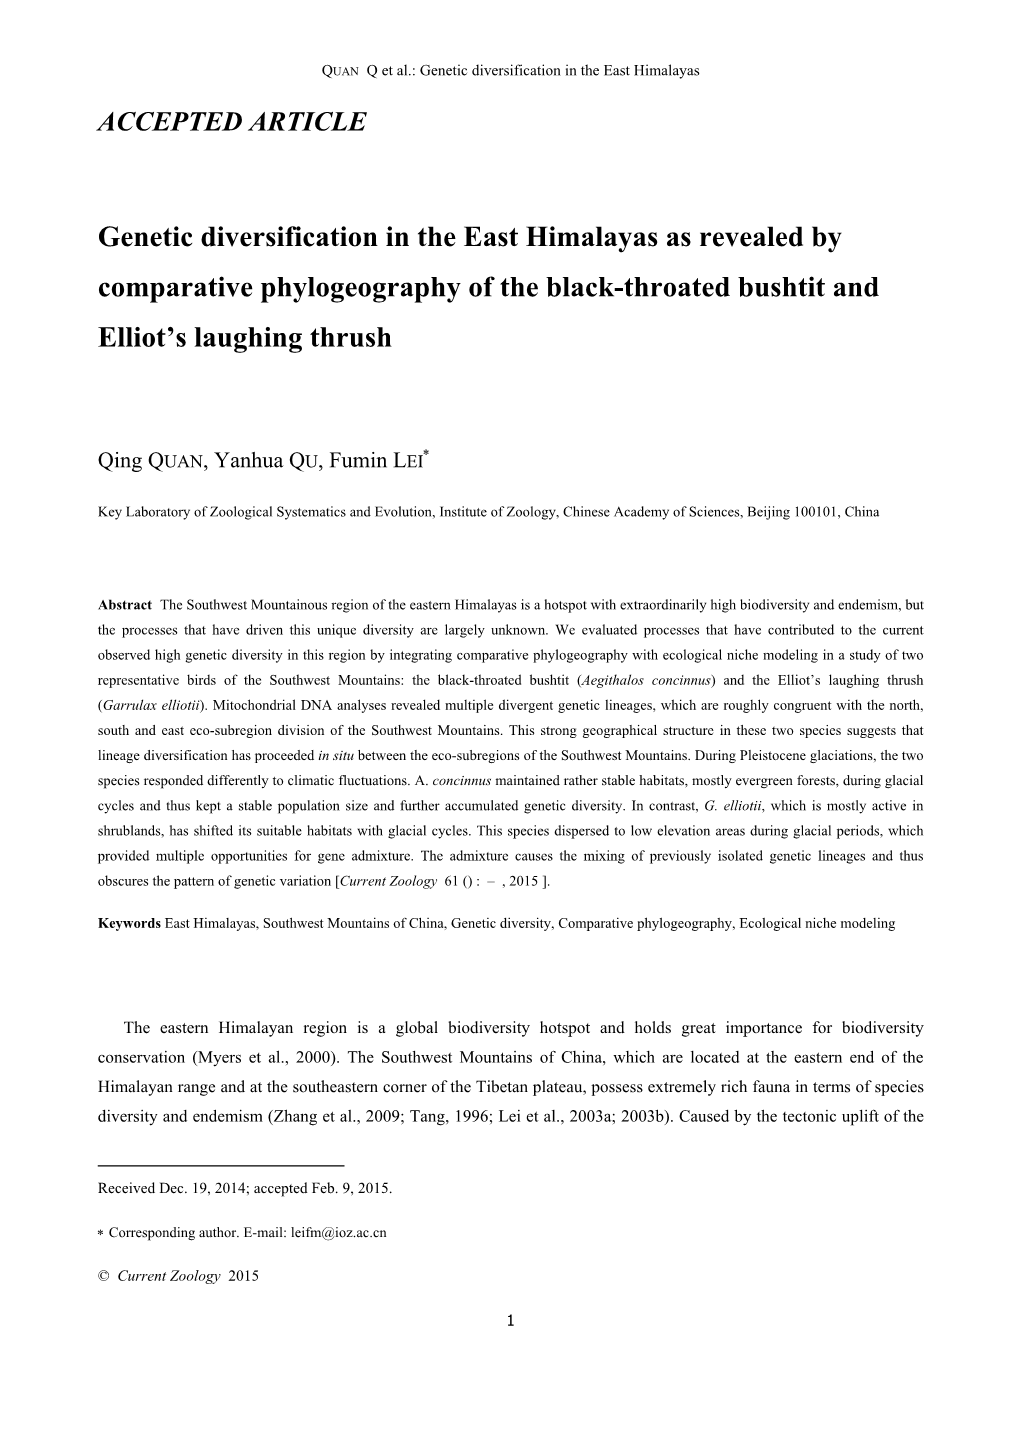 Genetic Diversification in the East Himalayas As Revealed by Comparative Phylogeography of the Black-Throated Bushtit and Elliot’S Laughing Thrush